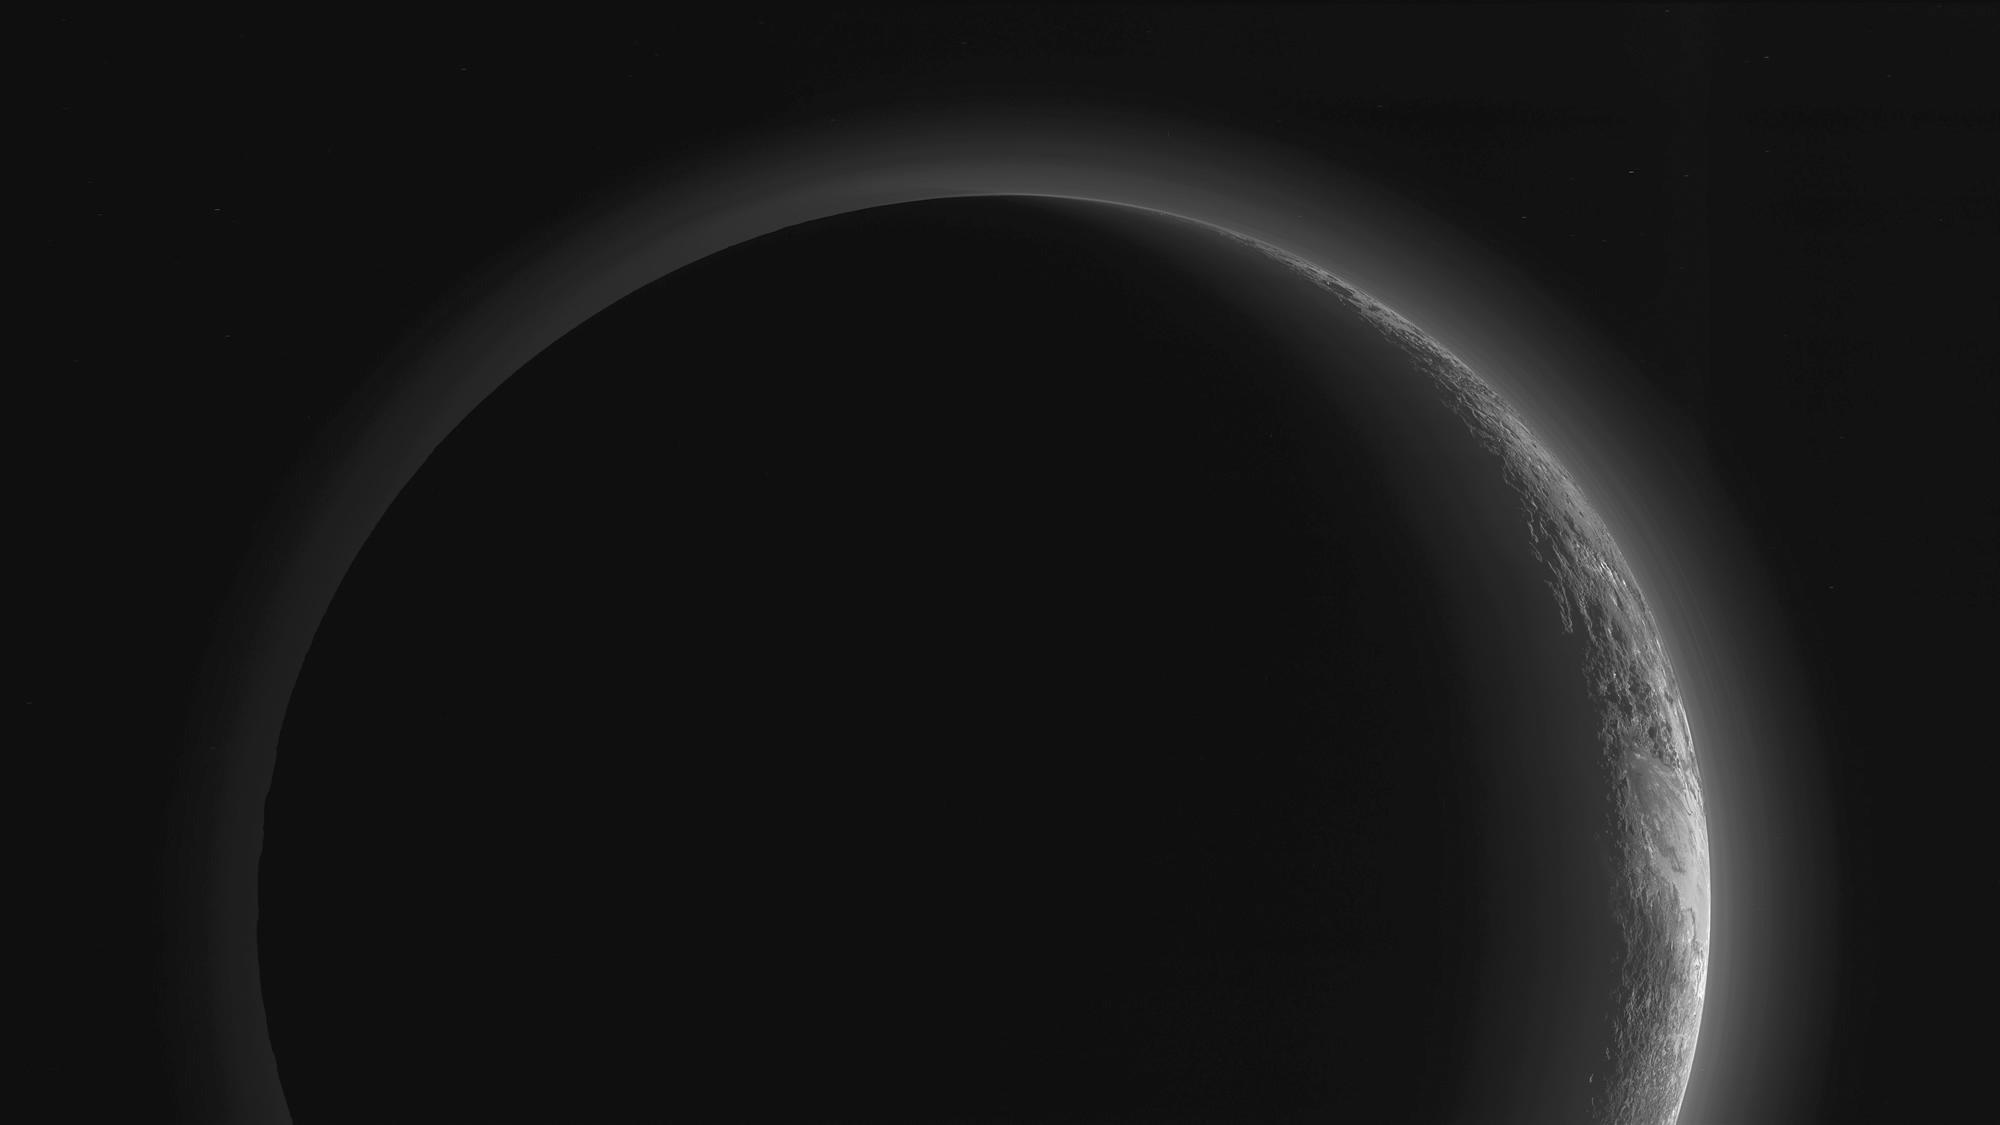 This image was made just 15 minutes after NASA New Horizons spacecraft closest approach to Pluto on July 14, 2015, as the spacecraft looked back at Pluto toward the sun.